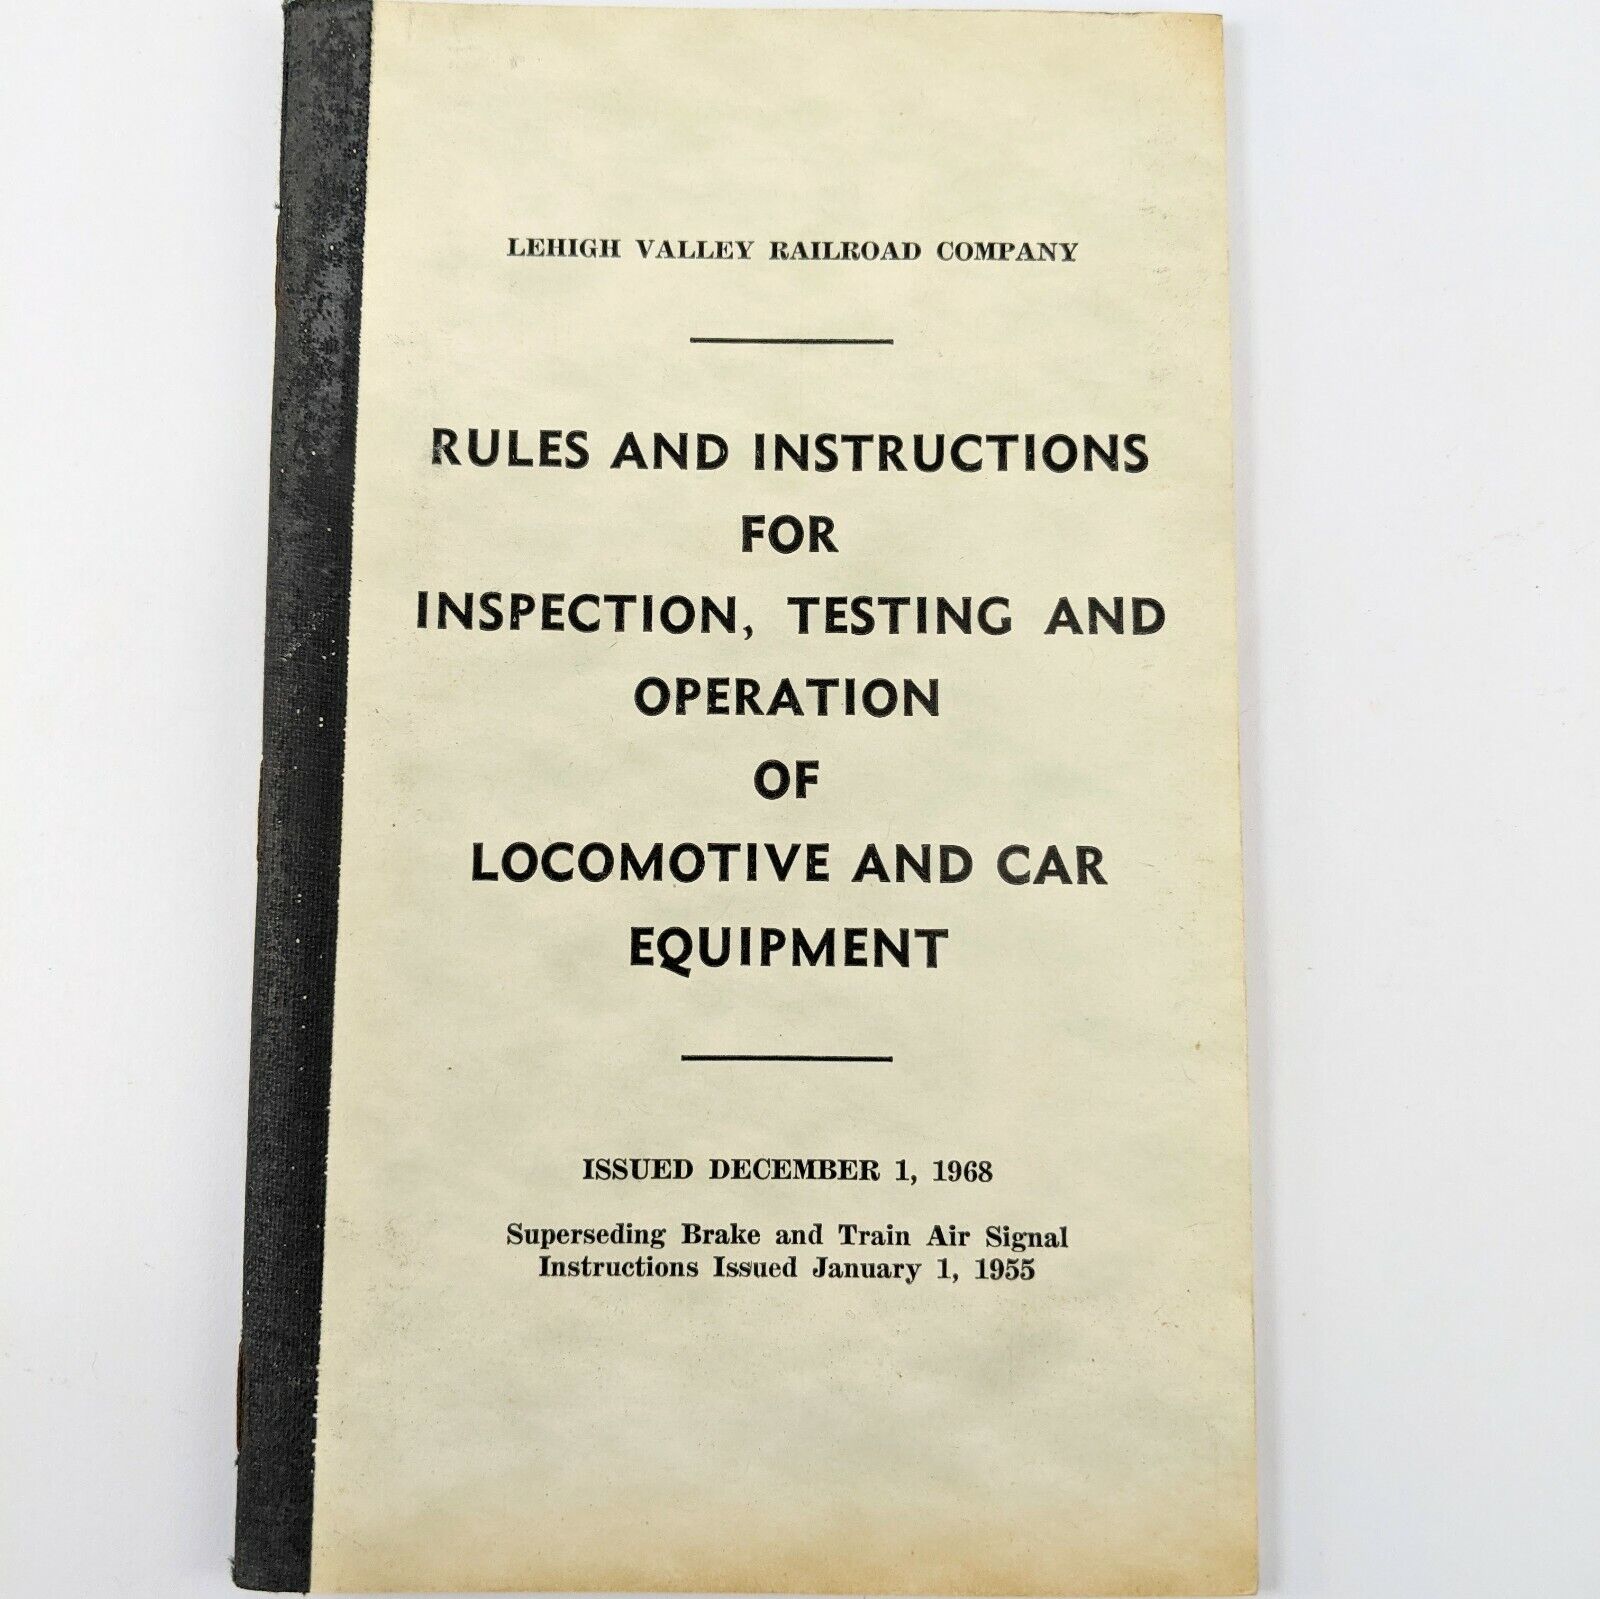 Vintage 1968 Lehigh Valley Railroad Rules Locomotive and Car Equipment Operation